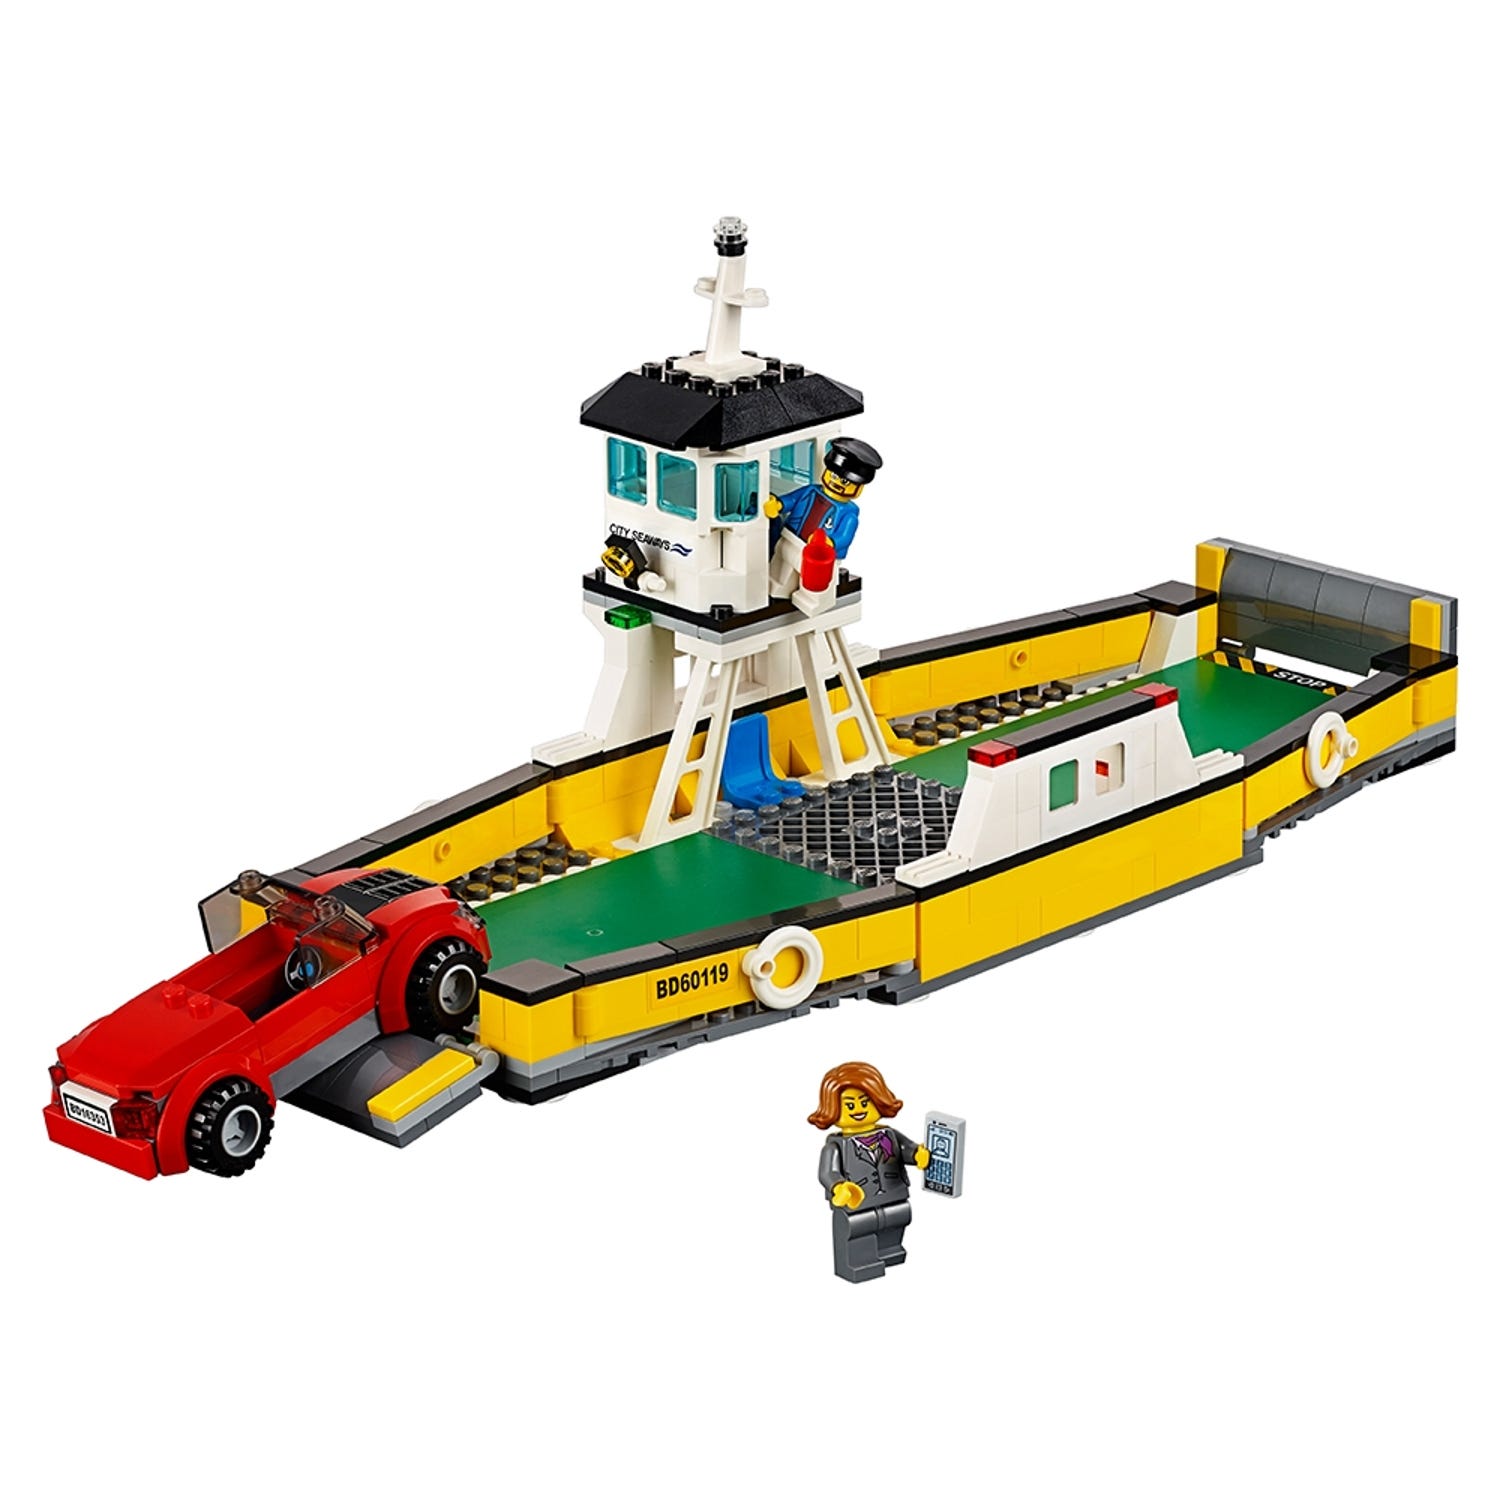 Ferry 60119 | City | Buy online at the Official LEGO® Shop US